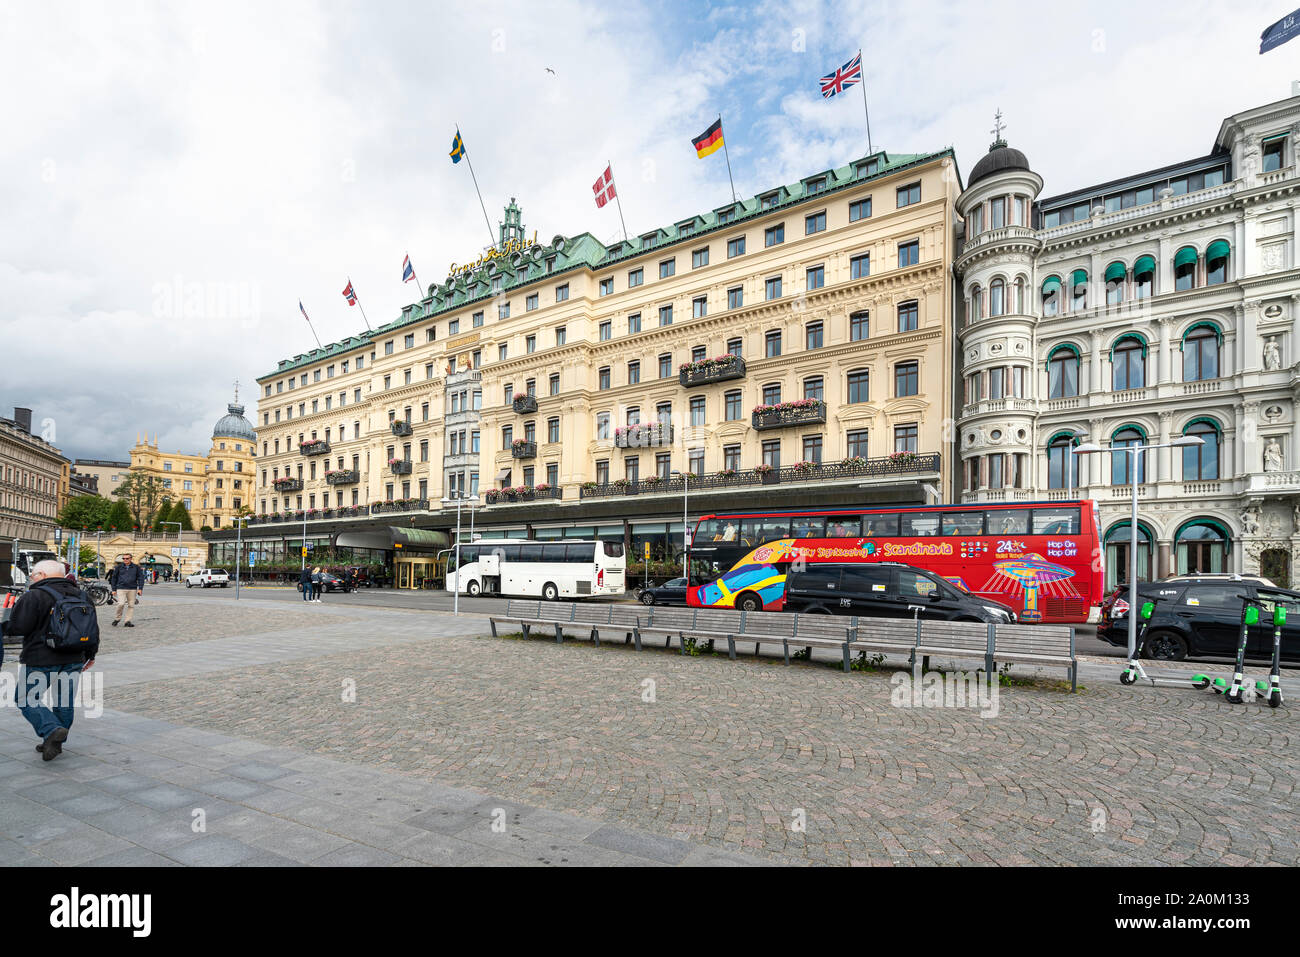 Stockholm, Sweden. September 2019. A view of the facade of Grand Hotel building Stock Photo